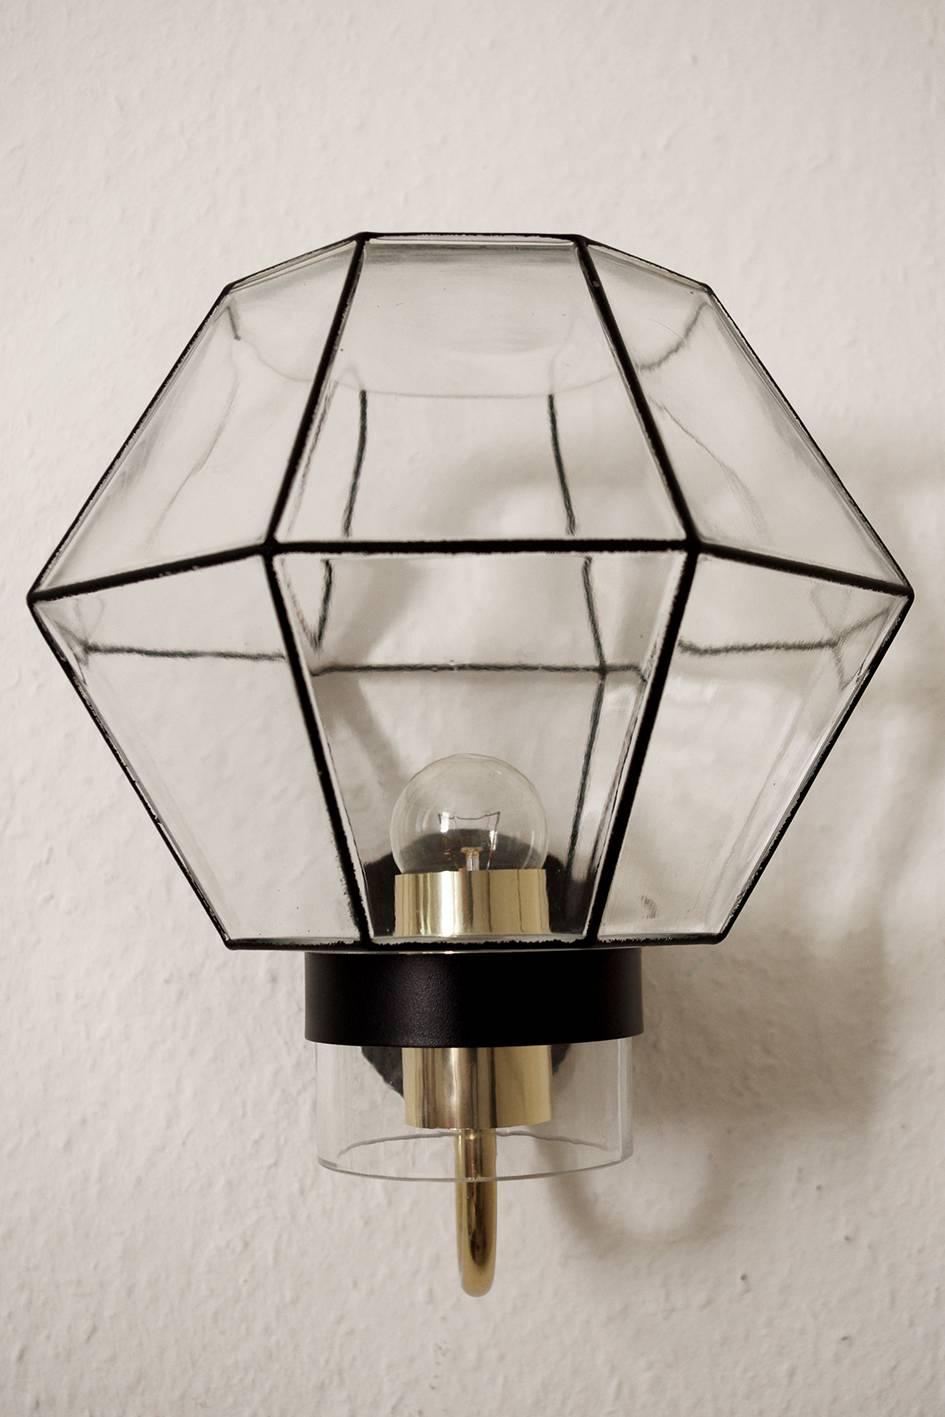 One of... large geometric crystal (topas) glass, brass and iron wall light sconce. 
Germany, 1960s.
Lamp sockets: 1x E27 (US E26)
